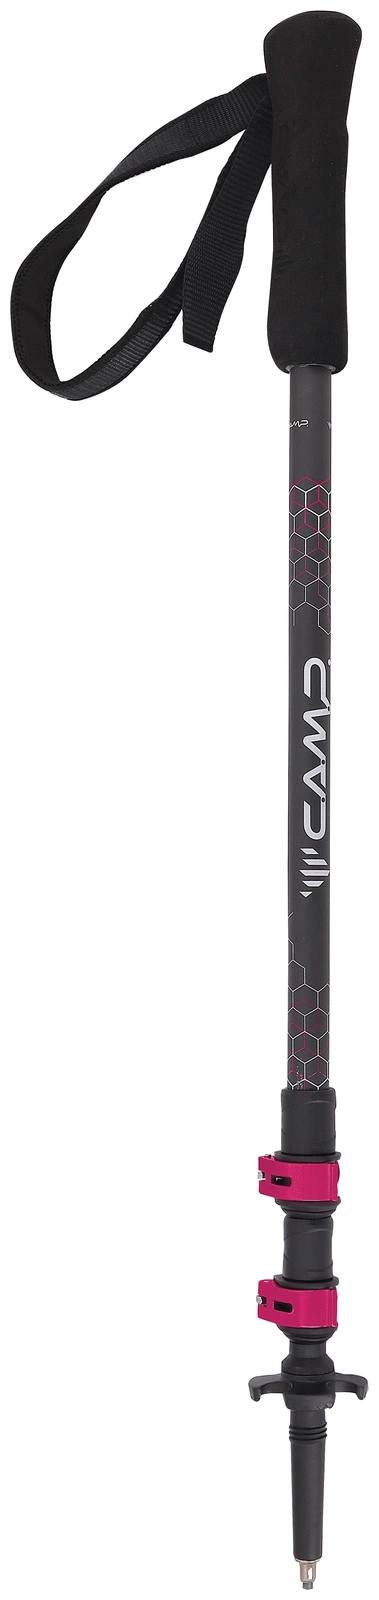 Camp Backcountry Carbon w